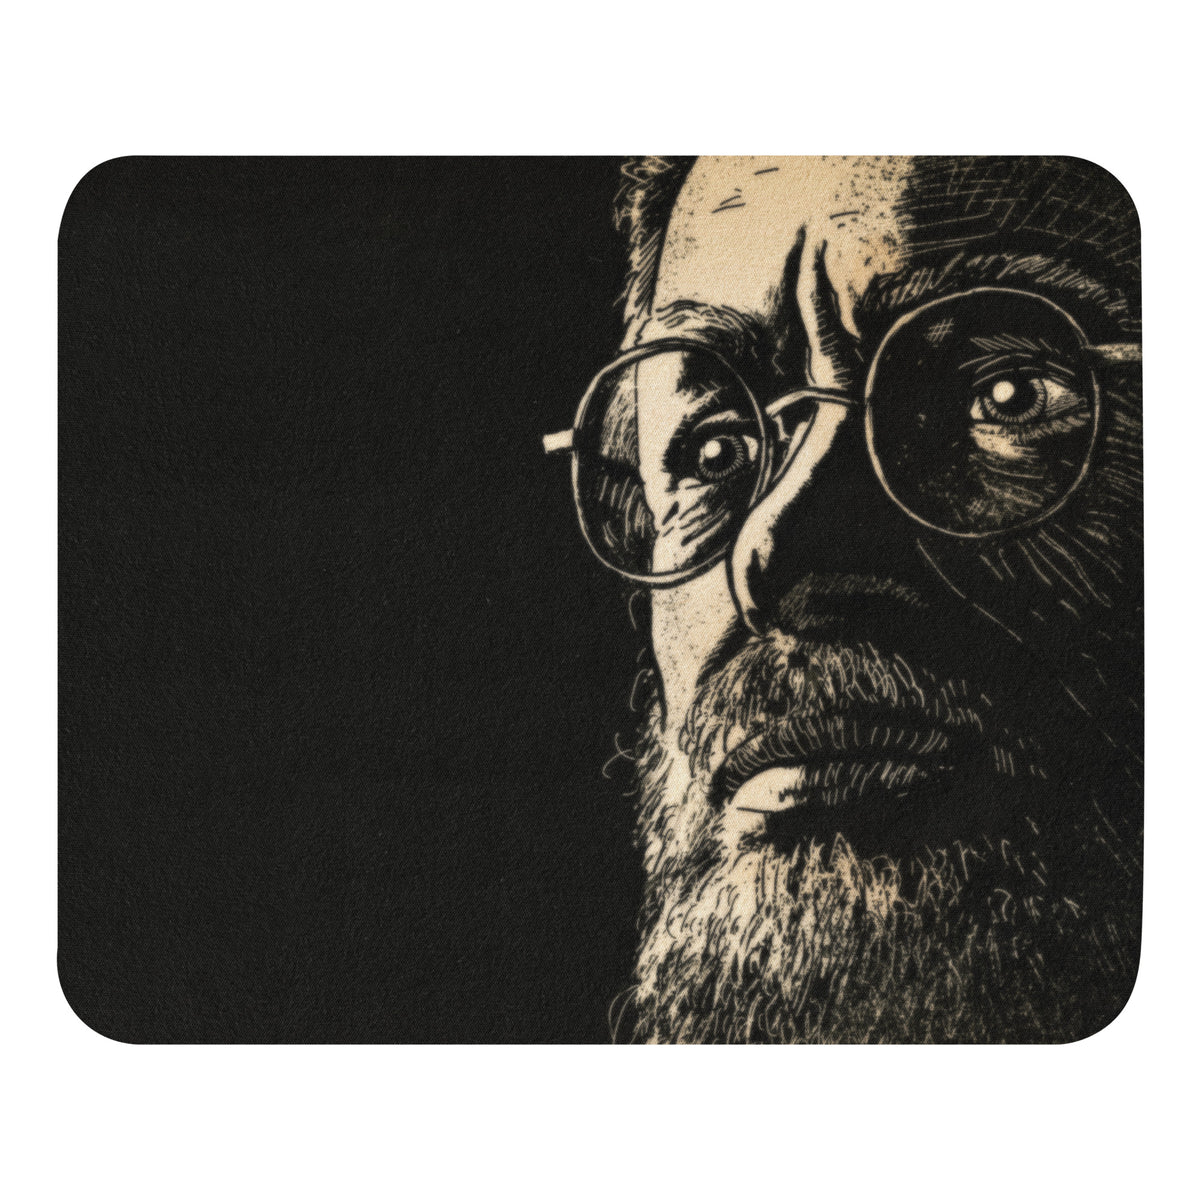 DONT WORRY ft Terence McKenna Mouse Pad